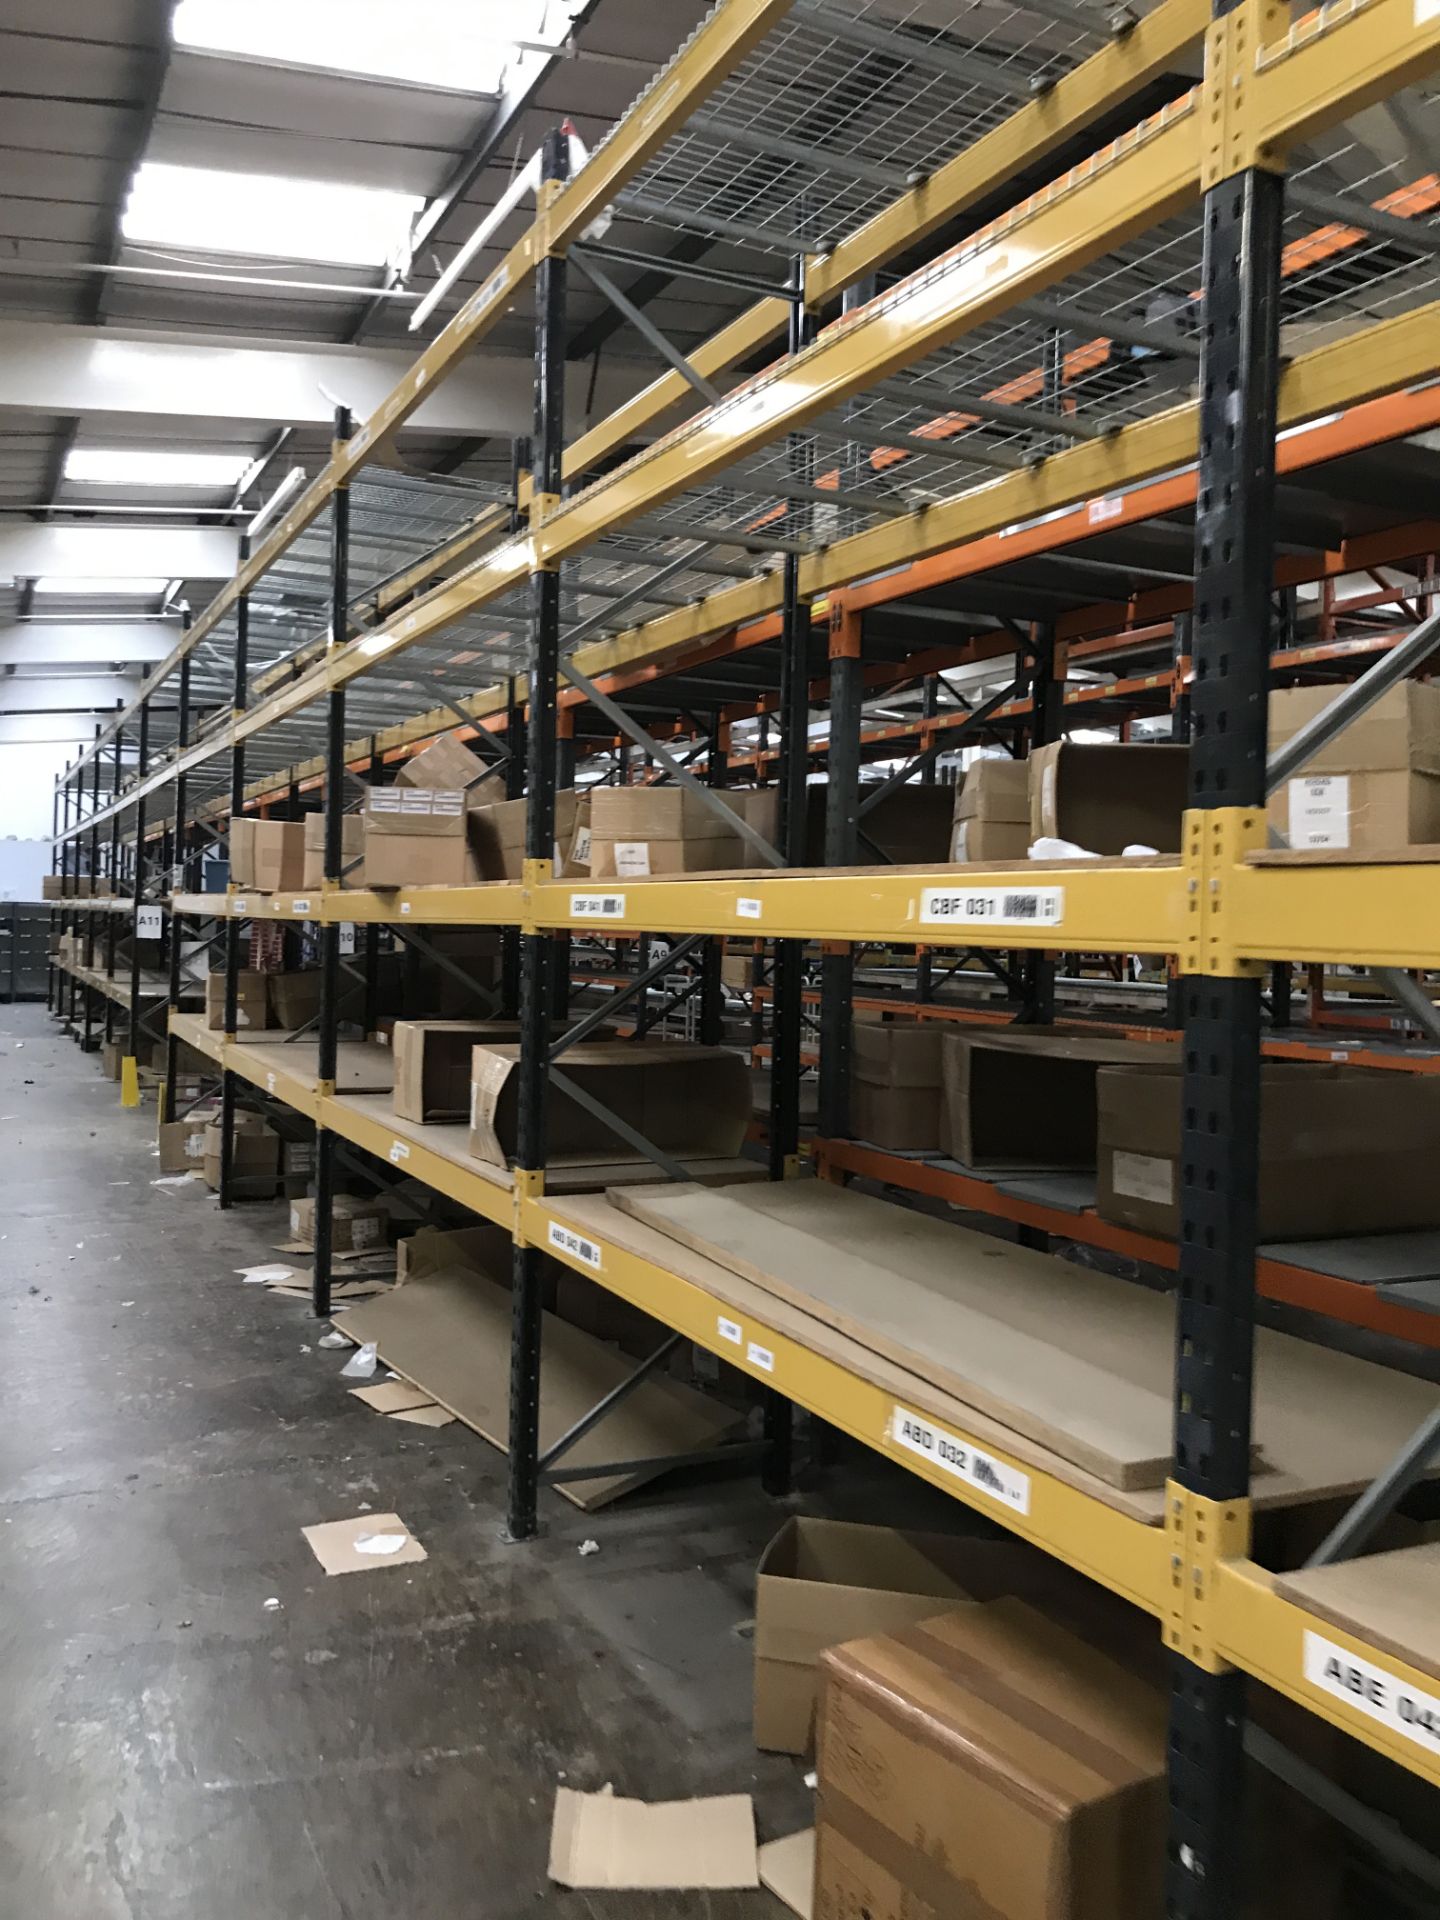 Link 51 11-Bay Mainly Four-Tier Boltless Pallet Racking, each bay approx. 2.8m long x 4m high x - Image 6 of 18